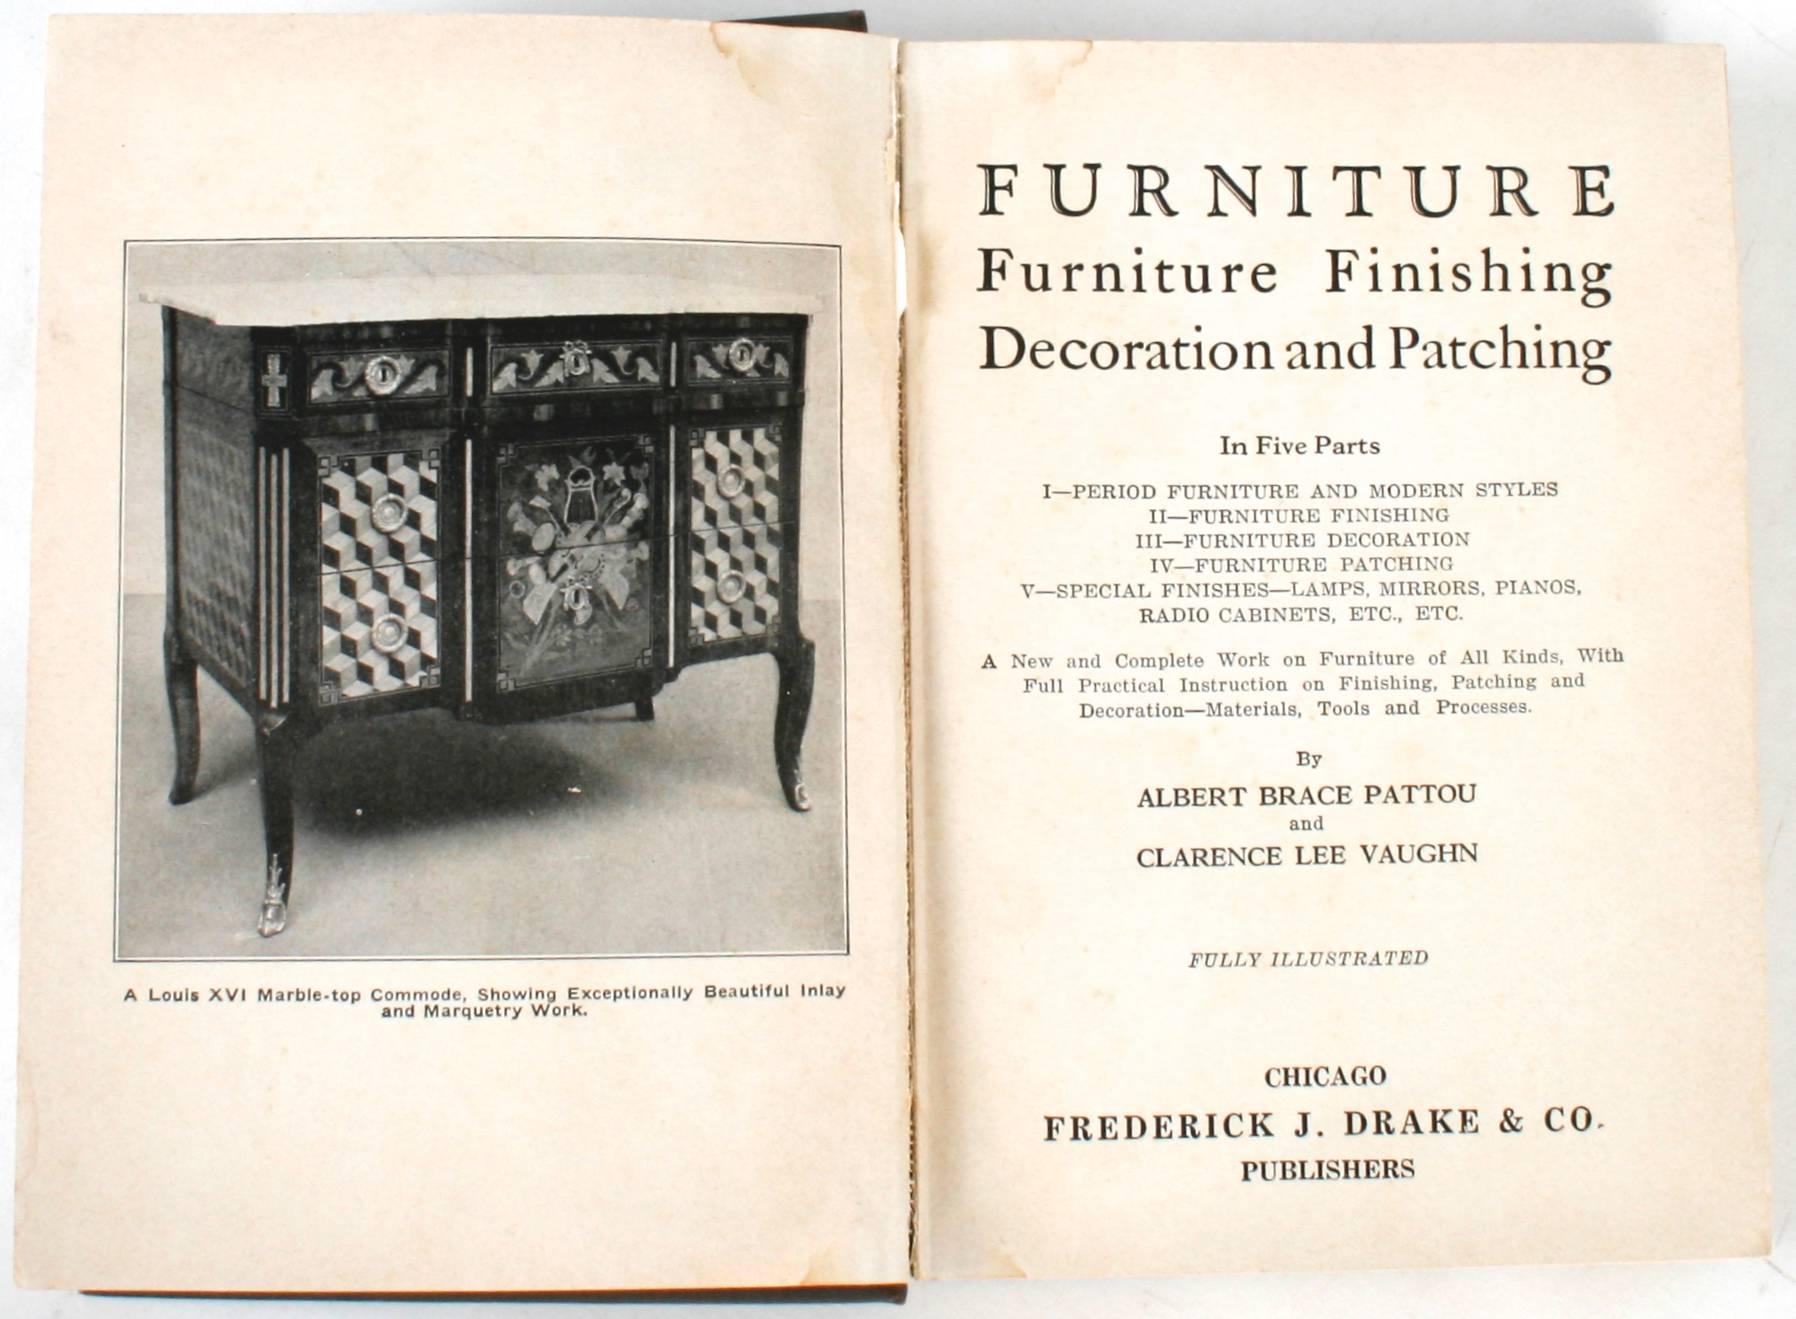 Two books on furniture finishing. 1.) Furniture Finishing, Decoration and Patching. Chicago: Frederick J. Drake and Co. Publishers., 1964. First edition fourth printing hardcover with no dust jacket. 551 pp. A fully illustrated guide to furniture